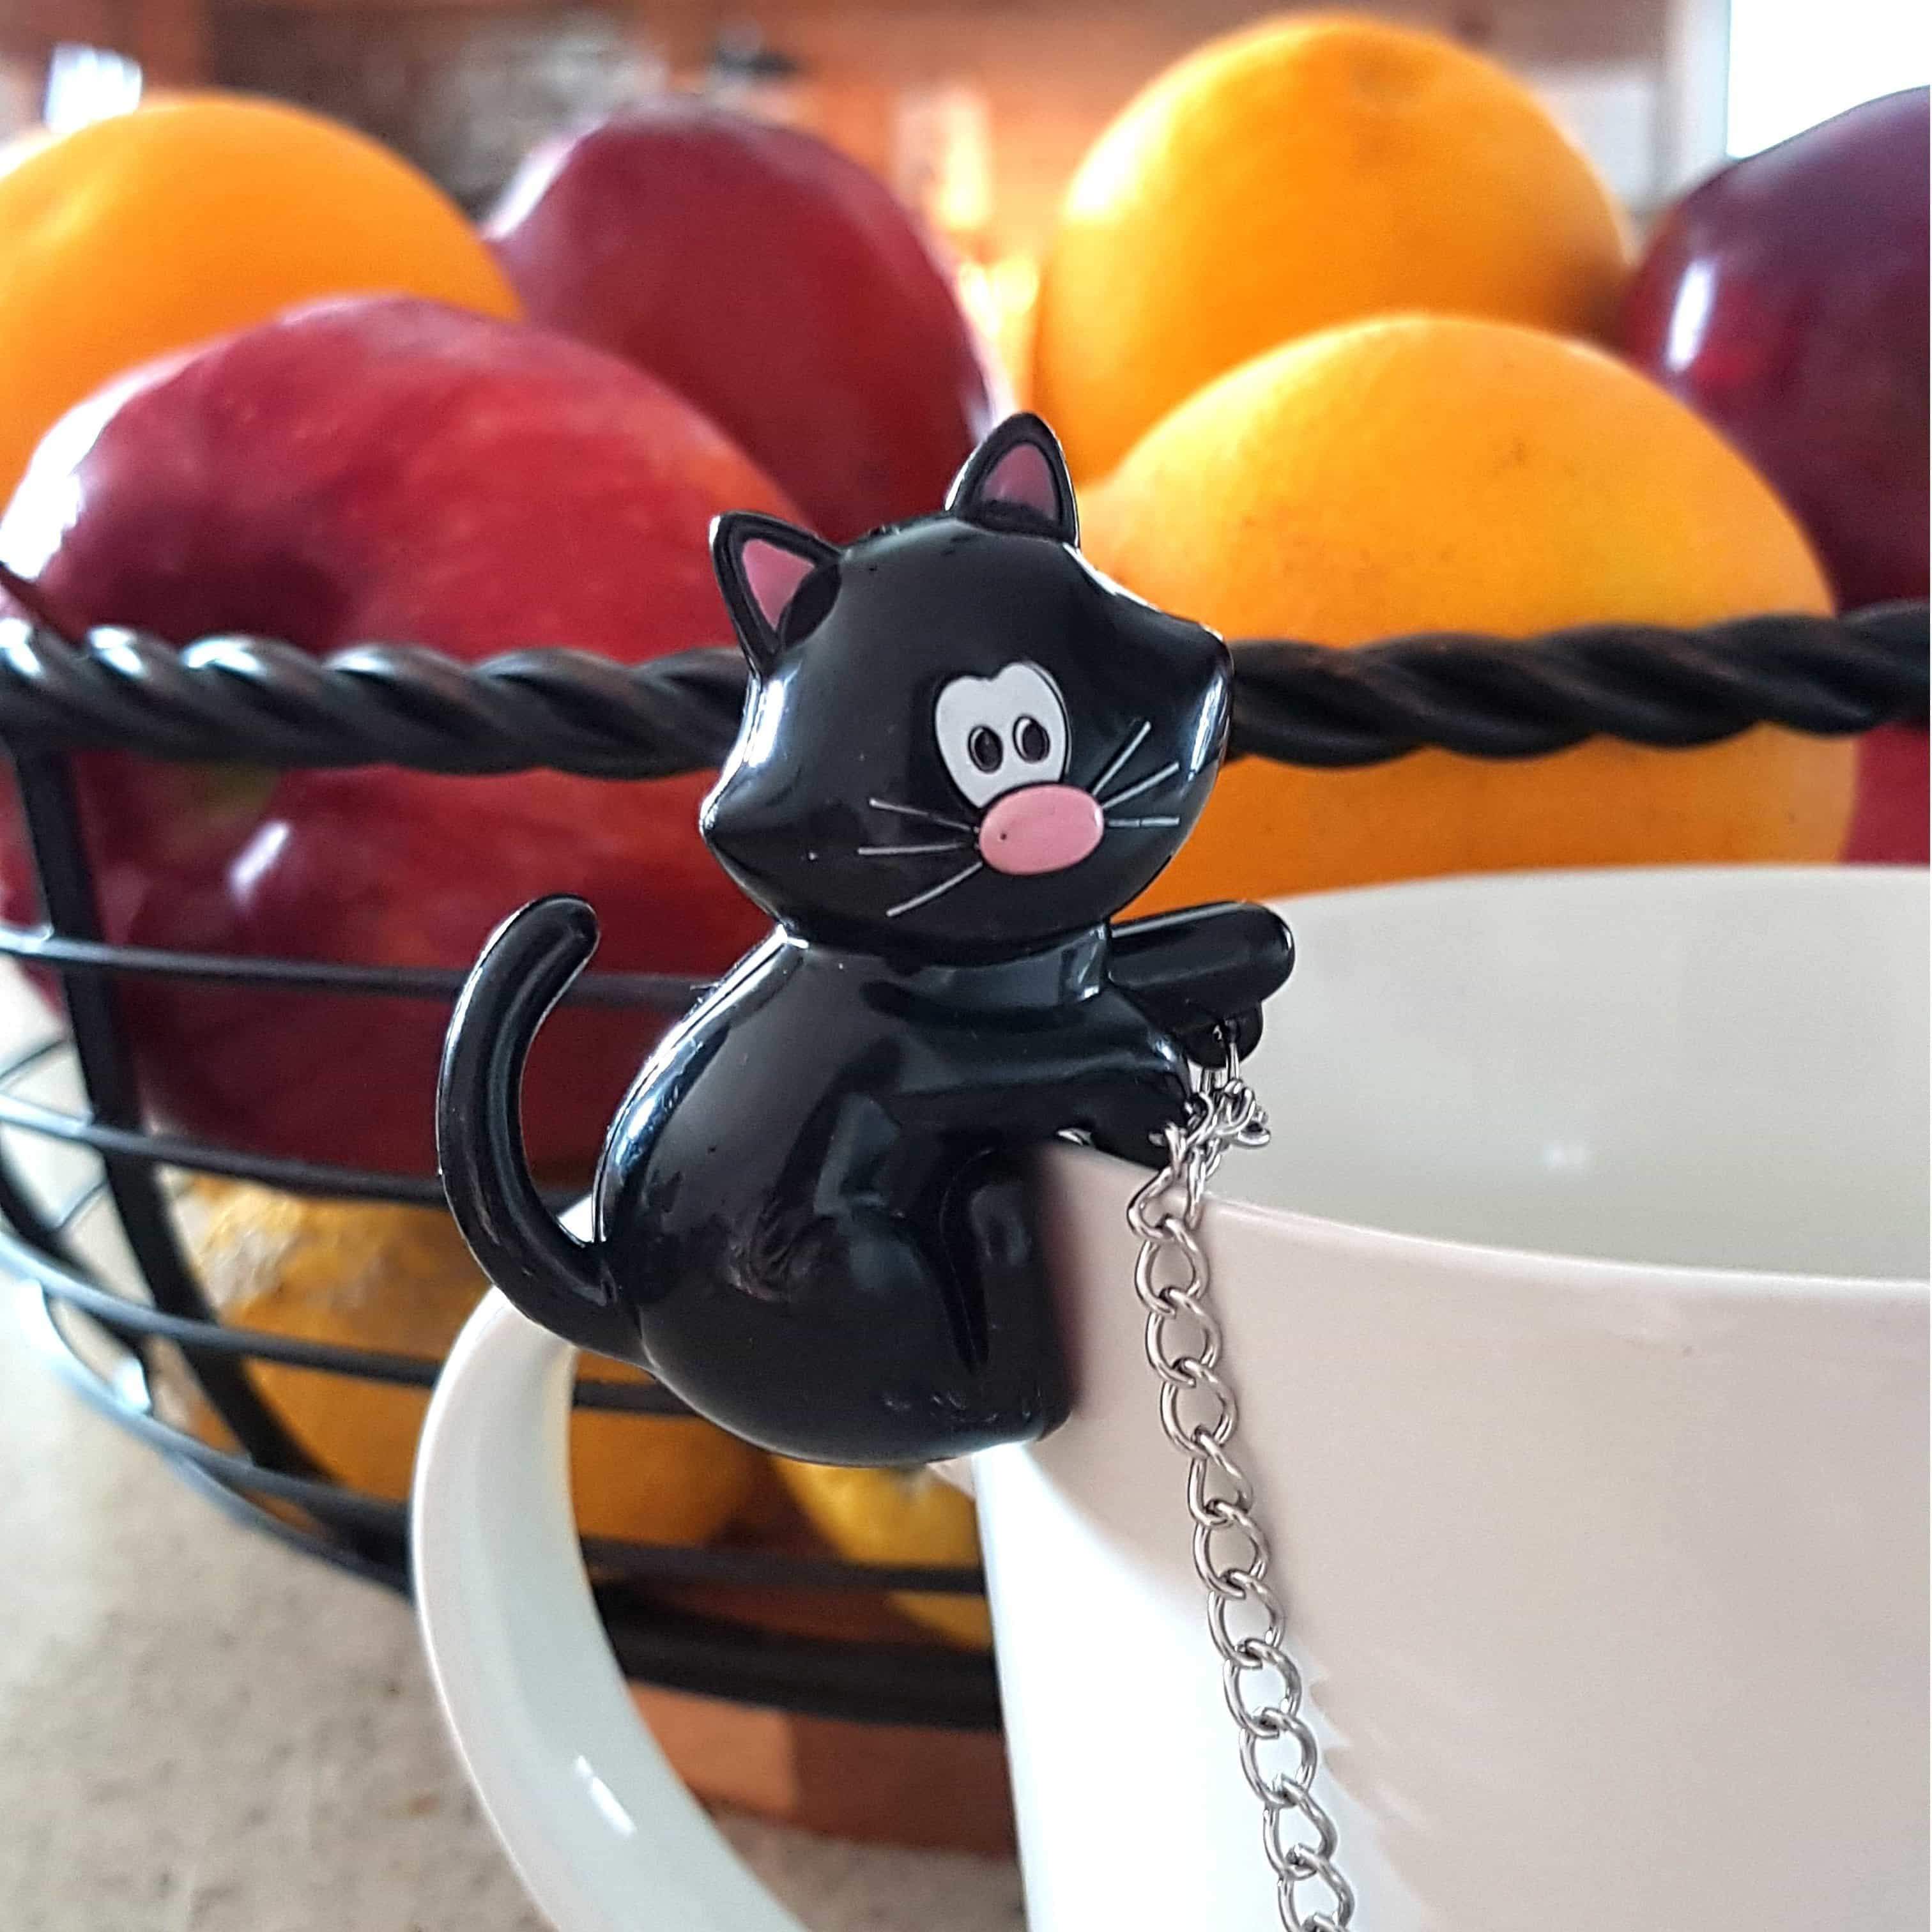 Unique Gifts for Cat People, Cat Tea Strainer Featuring a Black Cat and a Metal Fish Shaped Strainer